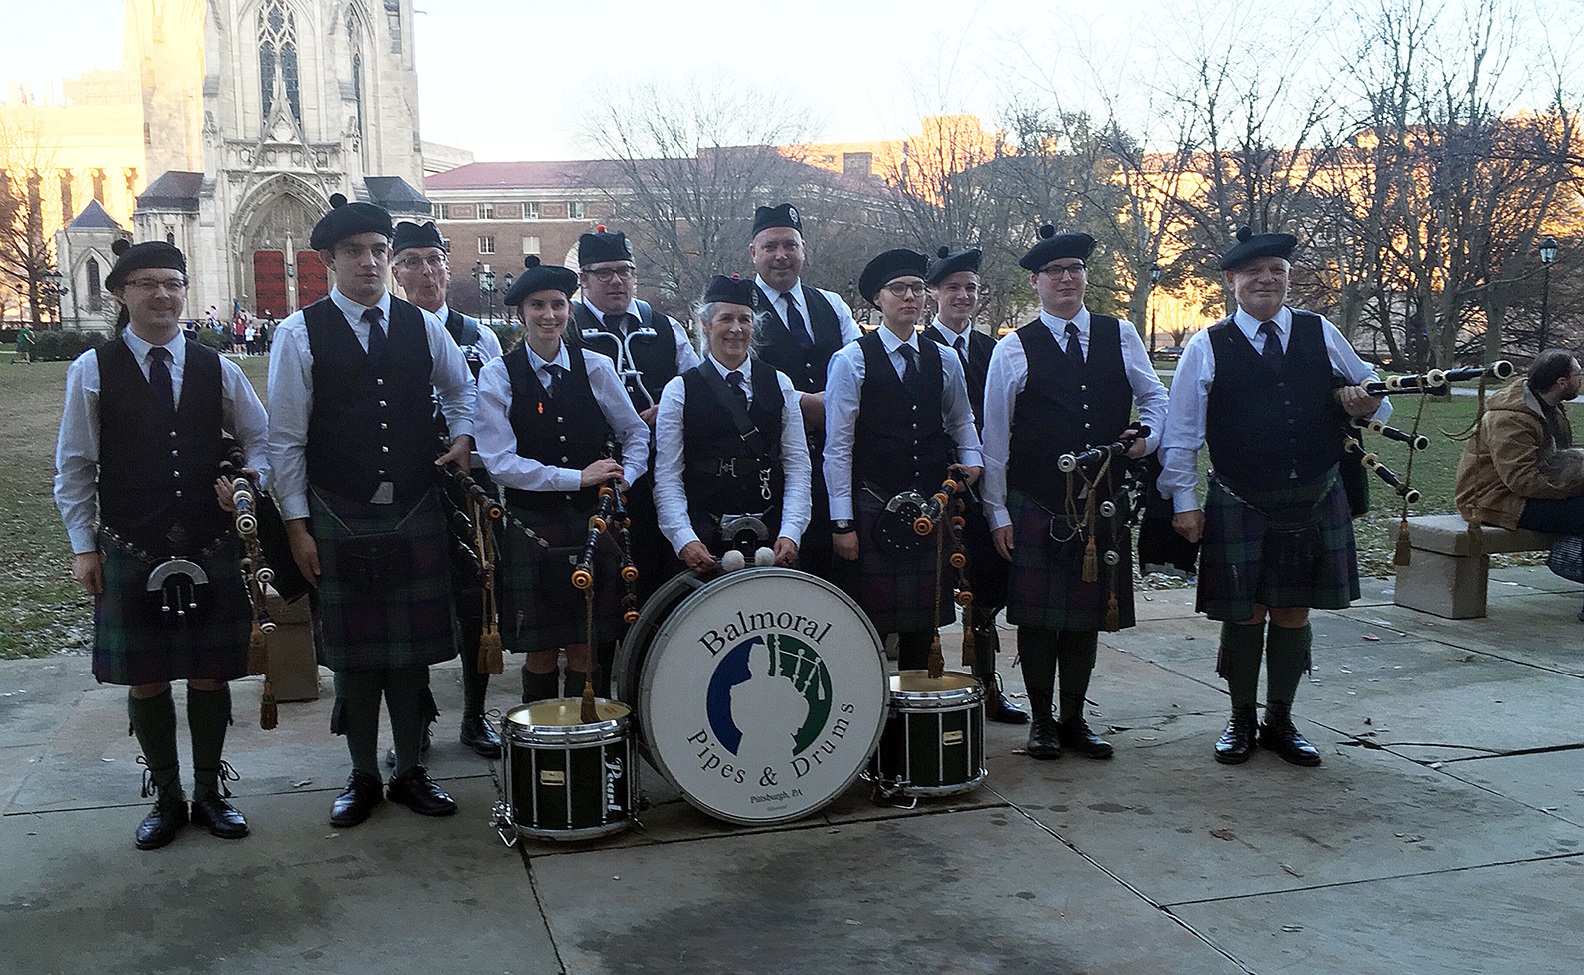 Balmoral Pipes & Drums spring schedule